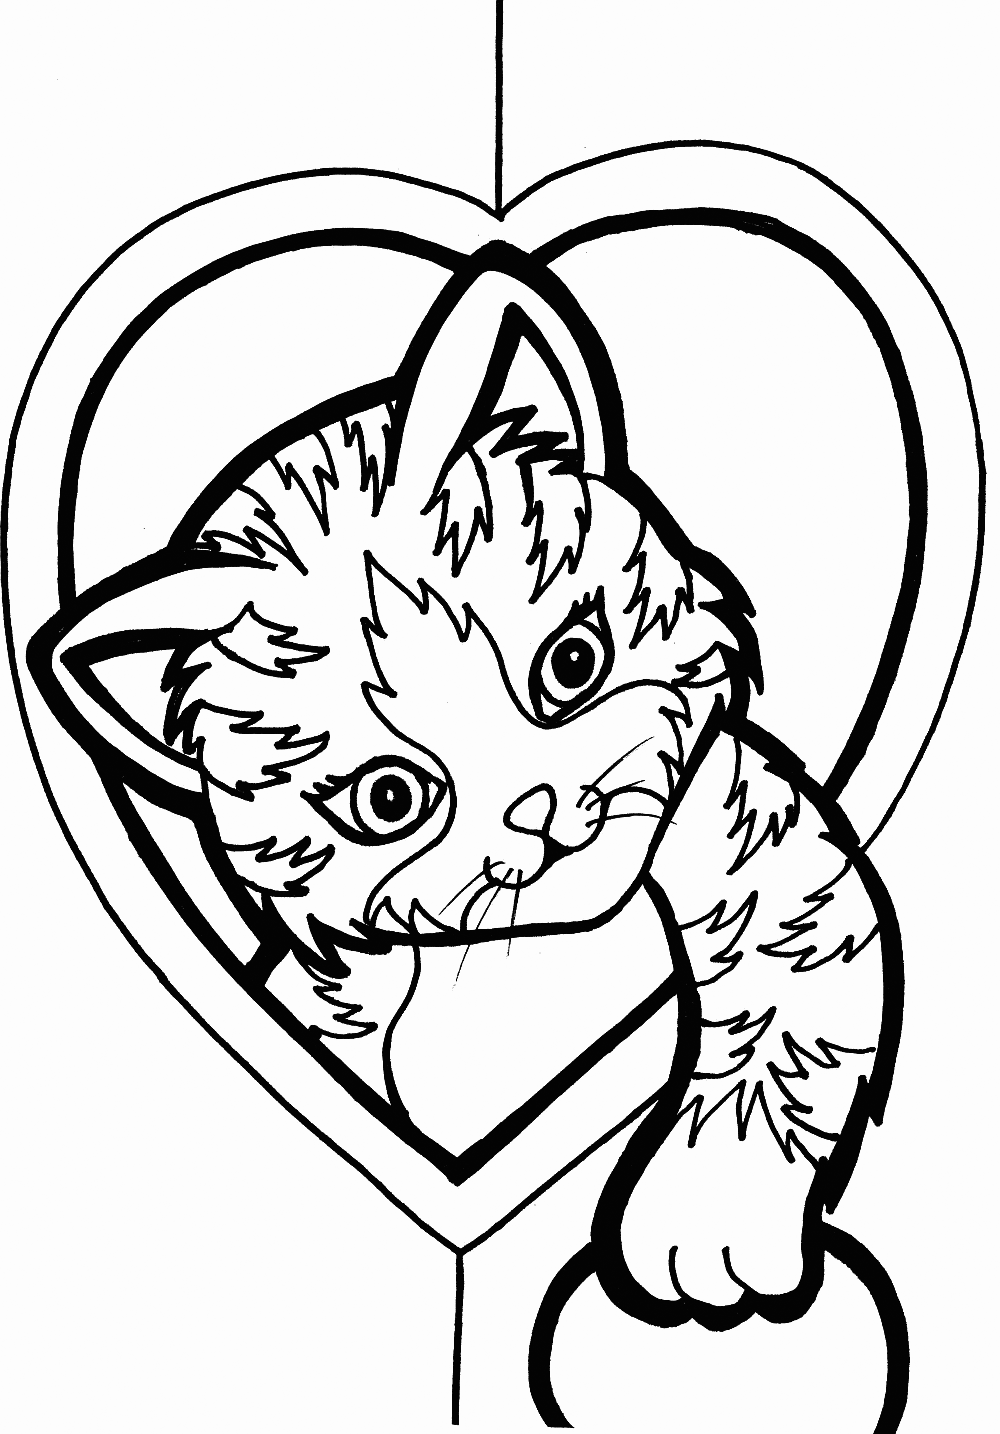 263 Cute Coloring Pages Kittens Printable with Animal character